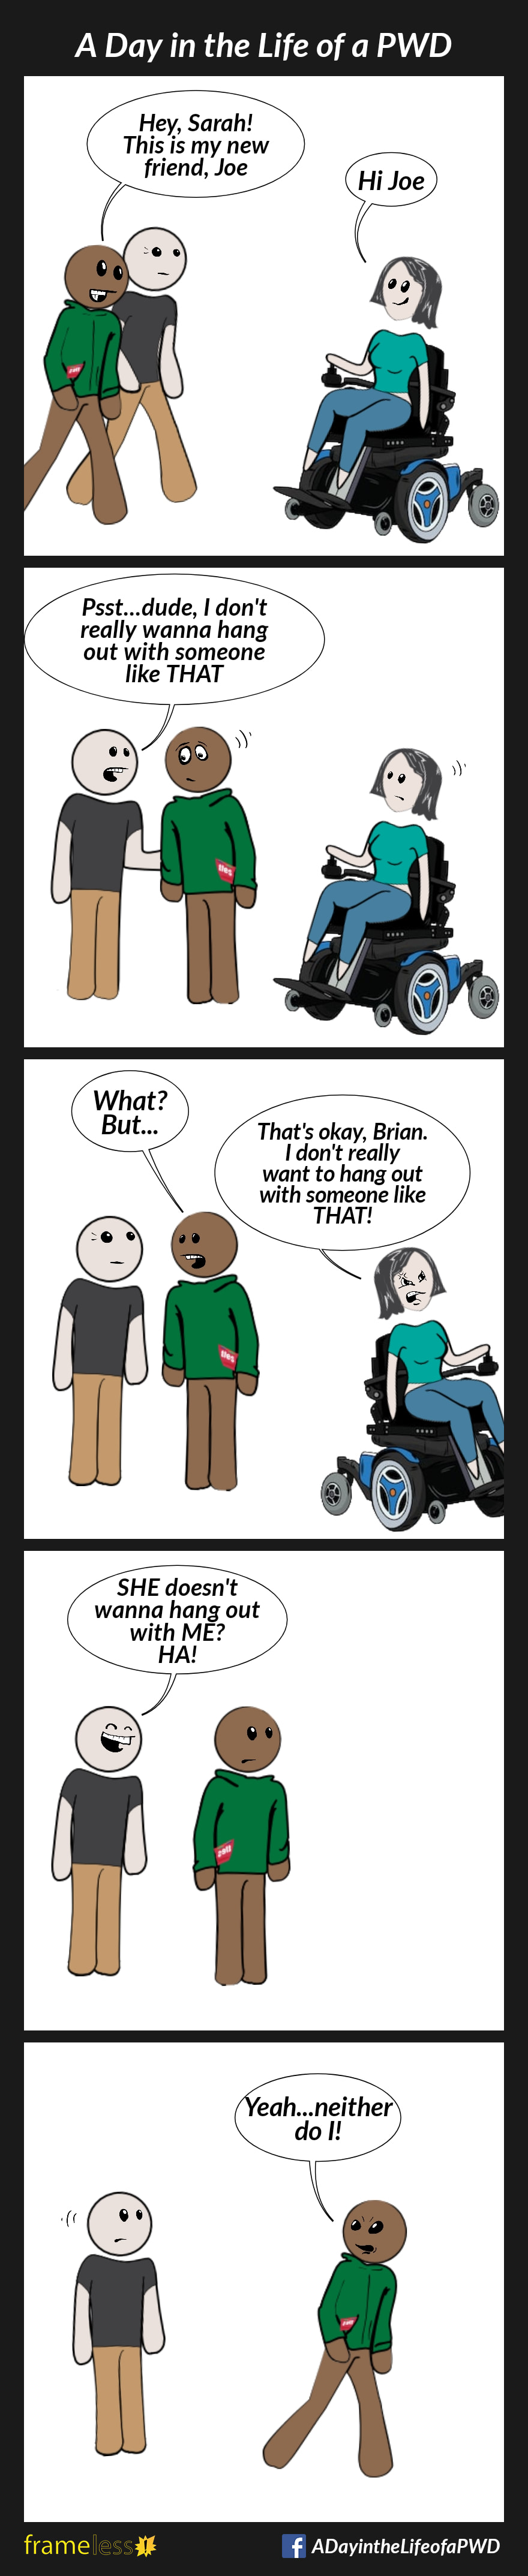 COMIC STRIP 
A Day in the Life of a PWD (Person With a Disability) 

Frame 1:
Sarah, who uses a power wheelchair, is approached by her friend, Brian, and another man.
BRIAN: Hey, Sarah! This is my new friend, Joe.
SARAH: Hi Joe

Frame 2:
Joe pulls Brian aside.
JOE: Psst...dude, I don't really wanna hang out with someone like THAT.
Sarah overhears. 

Frame 3: 
BRIAN: What? But...
SARAH (rolling away angrily): That's okay, Brian. I don't really want to hang out with someone like THAT.

Frame 4:
Brian sadly watches Sarah leave.
JOE: SHE doesn't want to hang out with ME? HA!

Frame 5:
Brian walks away in the direction Sarah went.
BRIAN (over his shoulder): Yeah...neither do I!